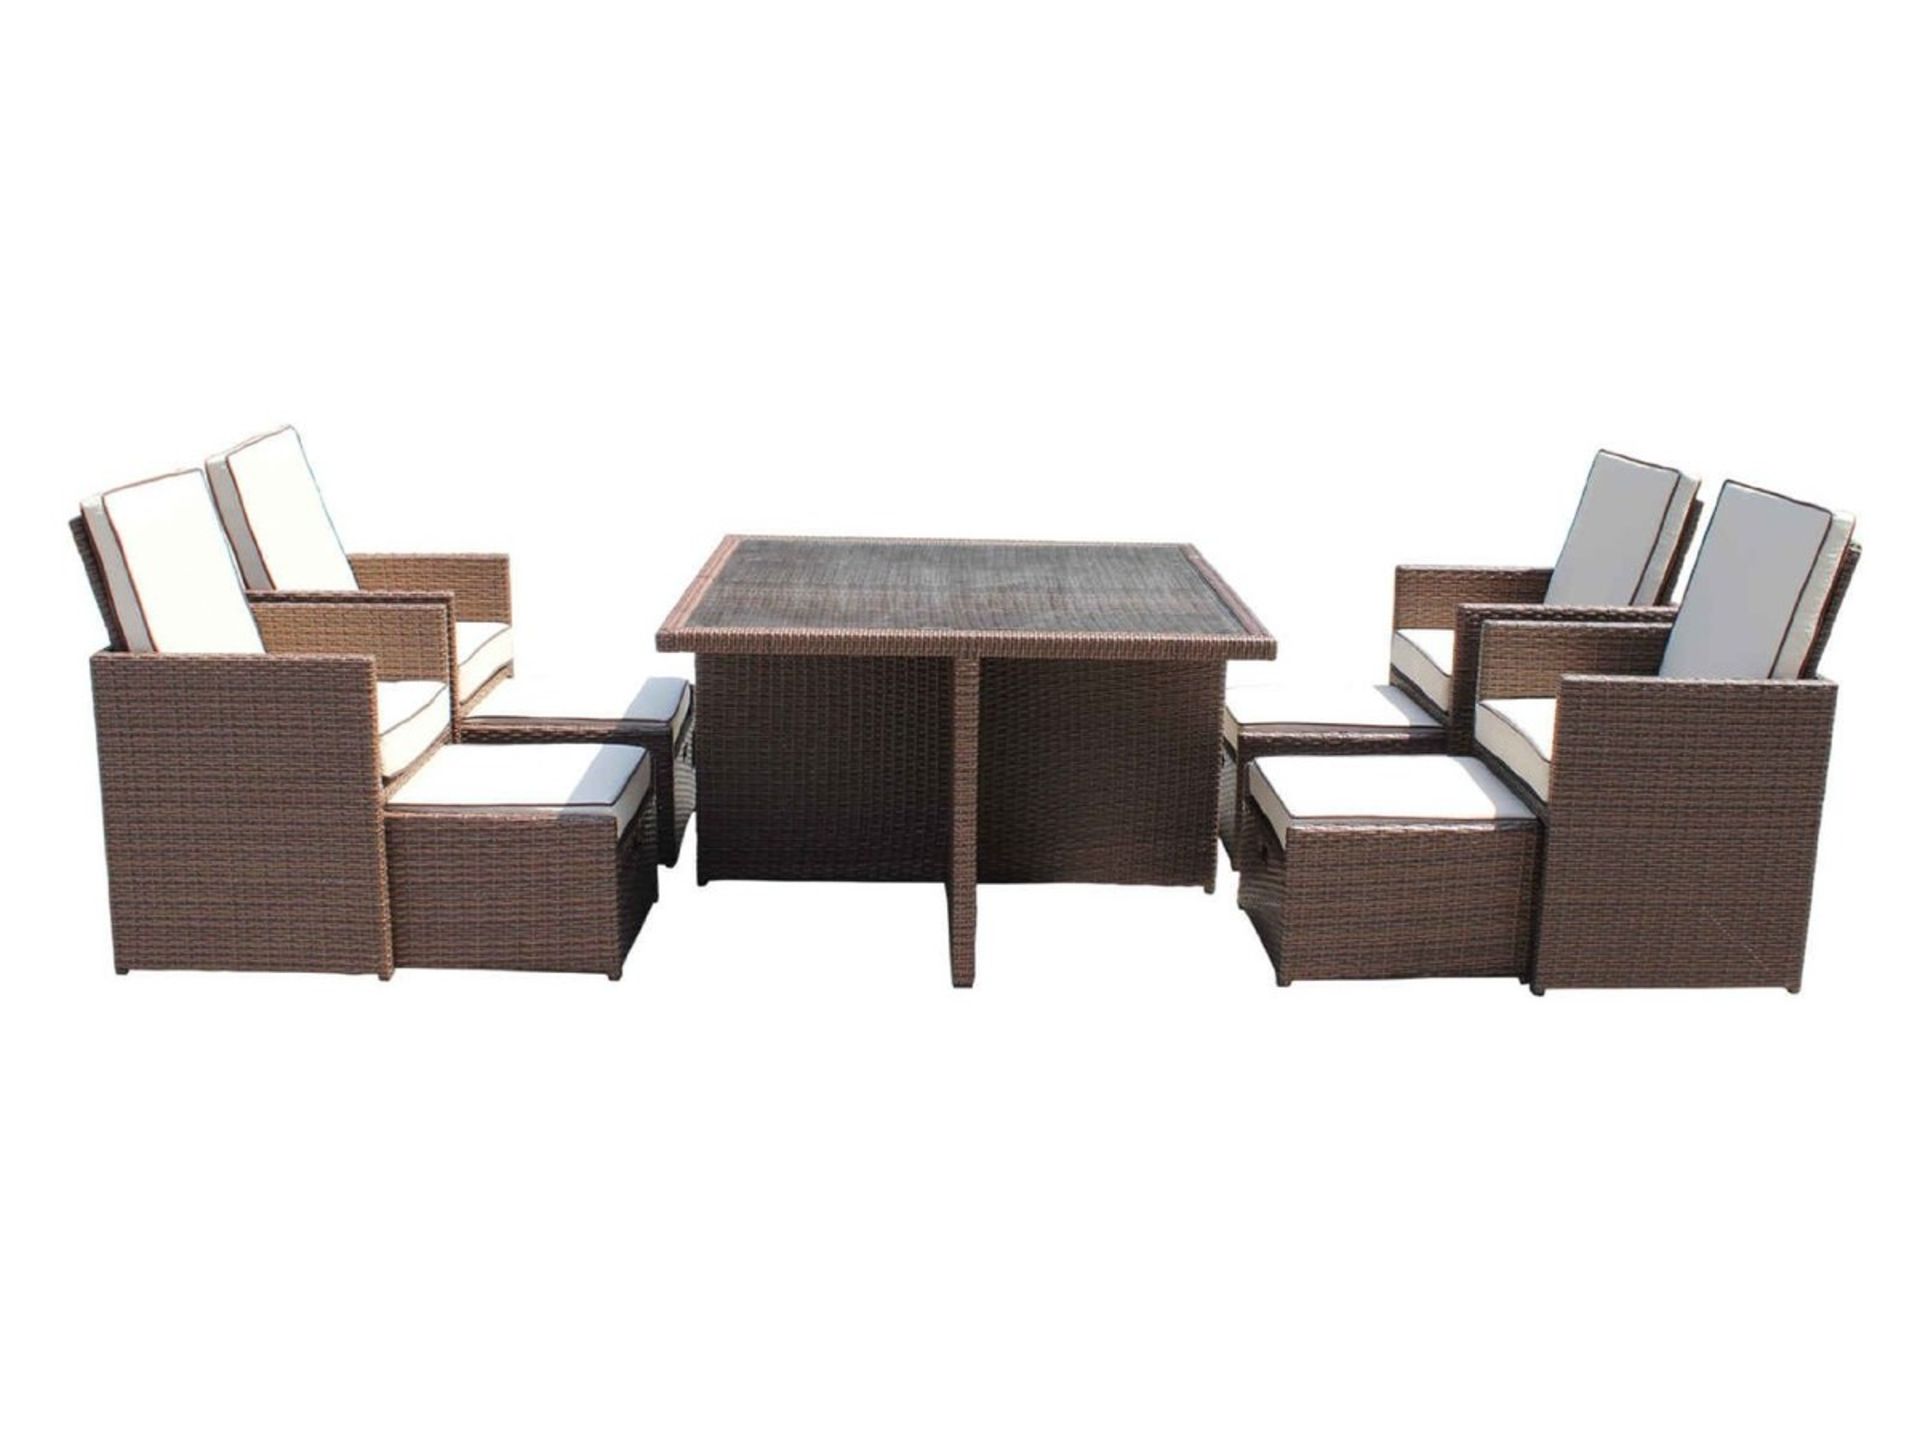 The Barcelona 9 Piece Rattan Garden Cube Set in chocolate brown mix rattan. - Image 2 of 3